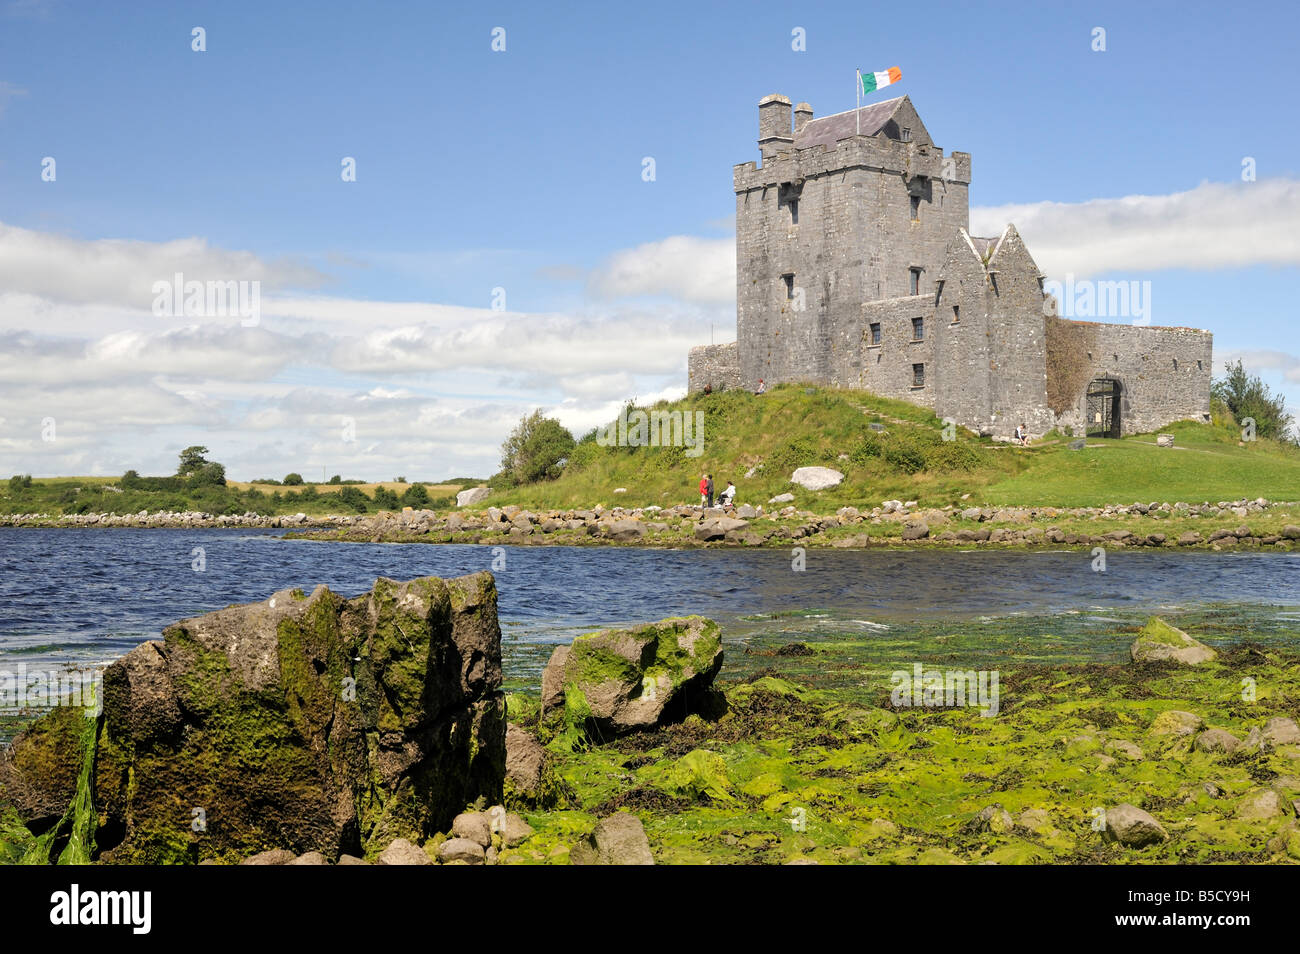 Dunguaire Castle, Kinvara, County Galway, Irland, Eire Stockfoto